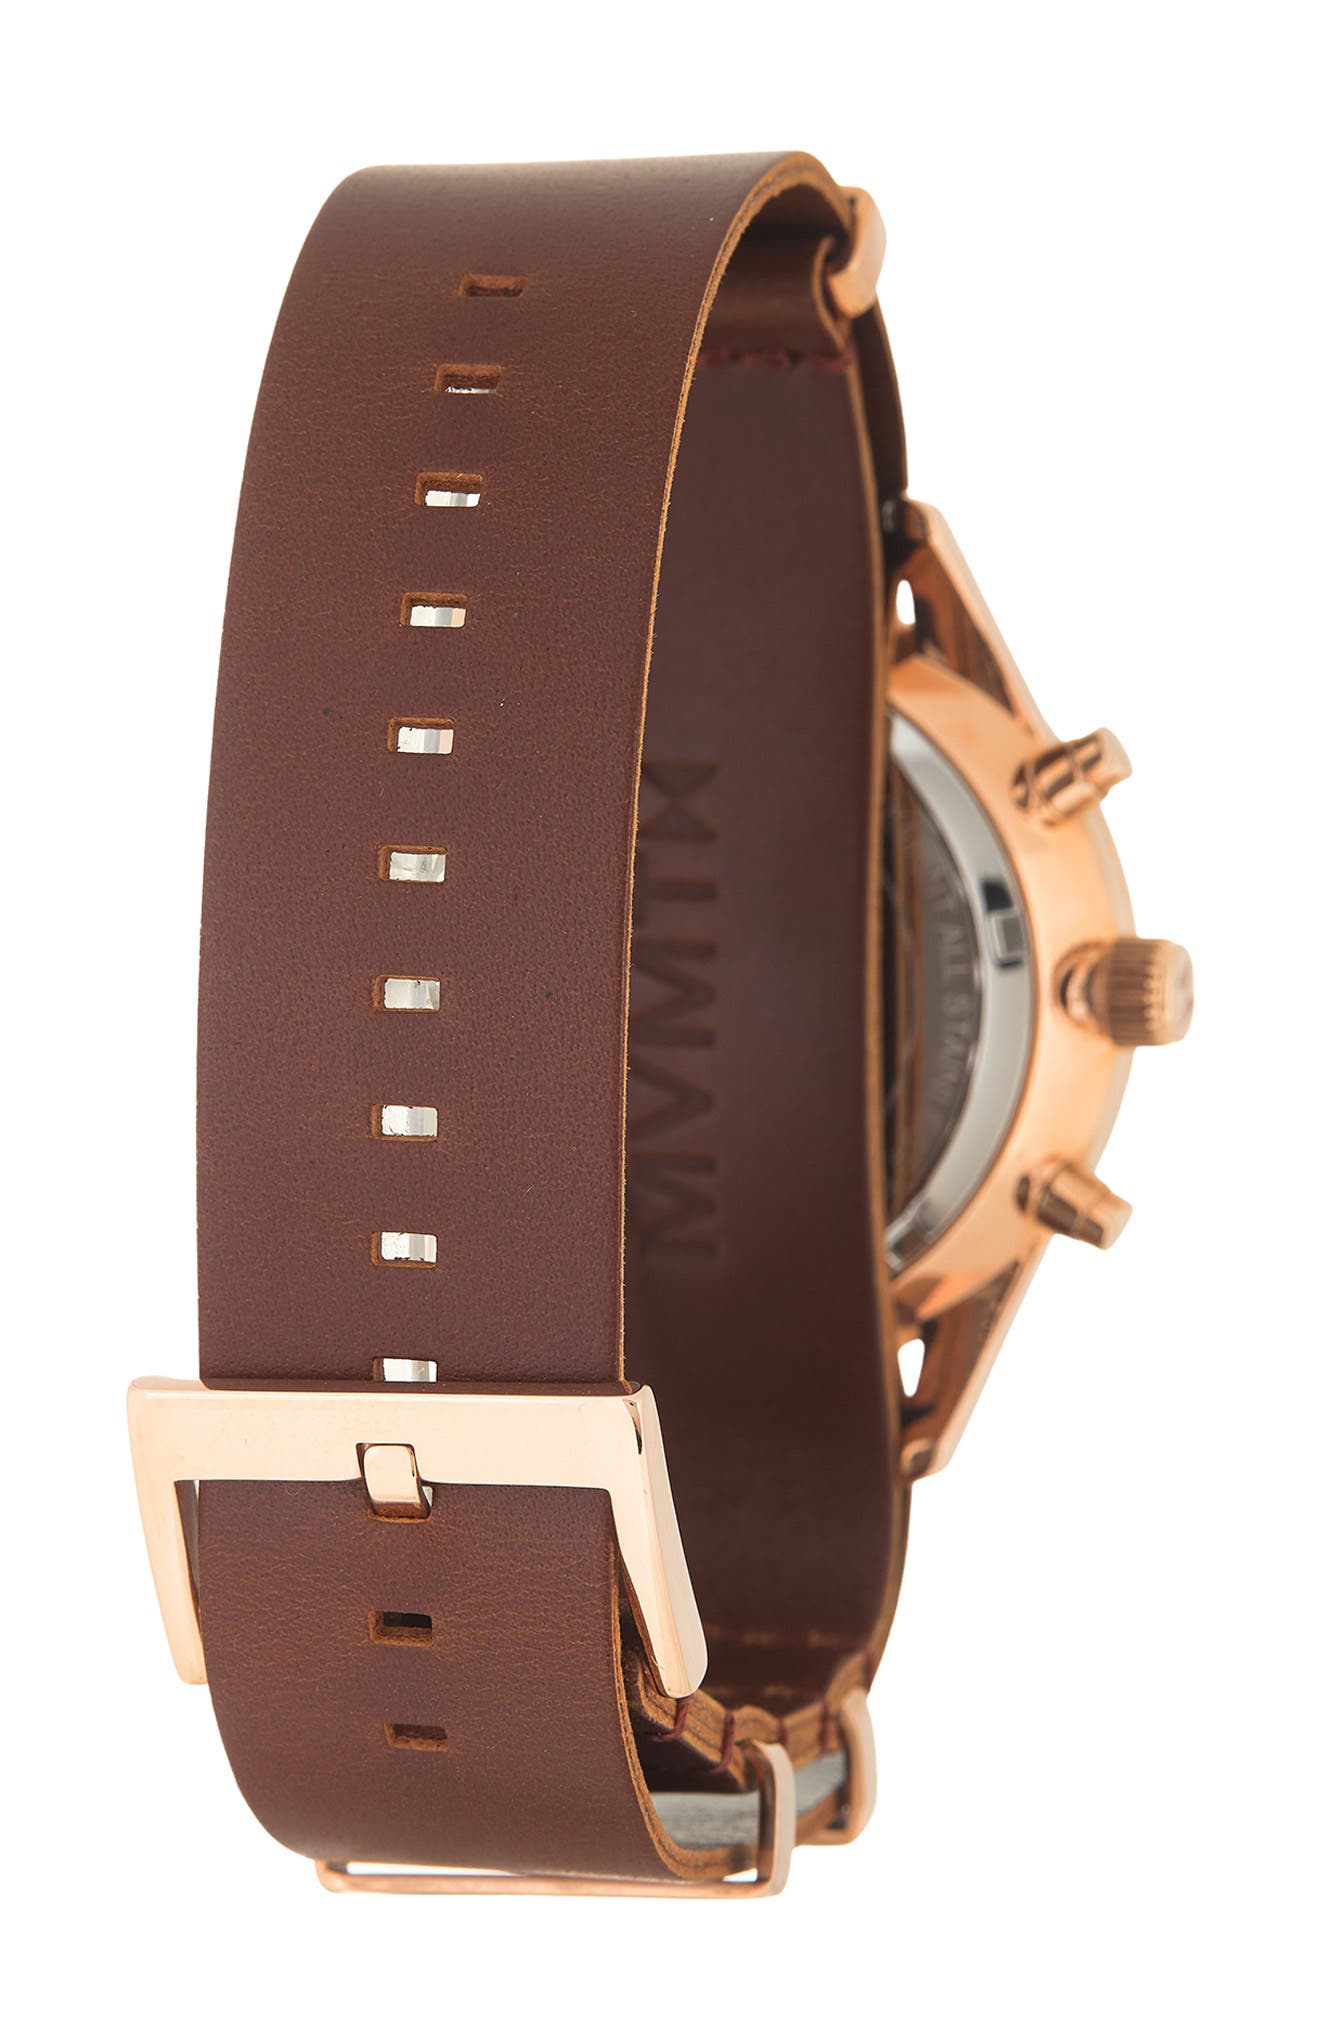 Mvmt Men's Rosewood Leather Band Watch In White